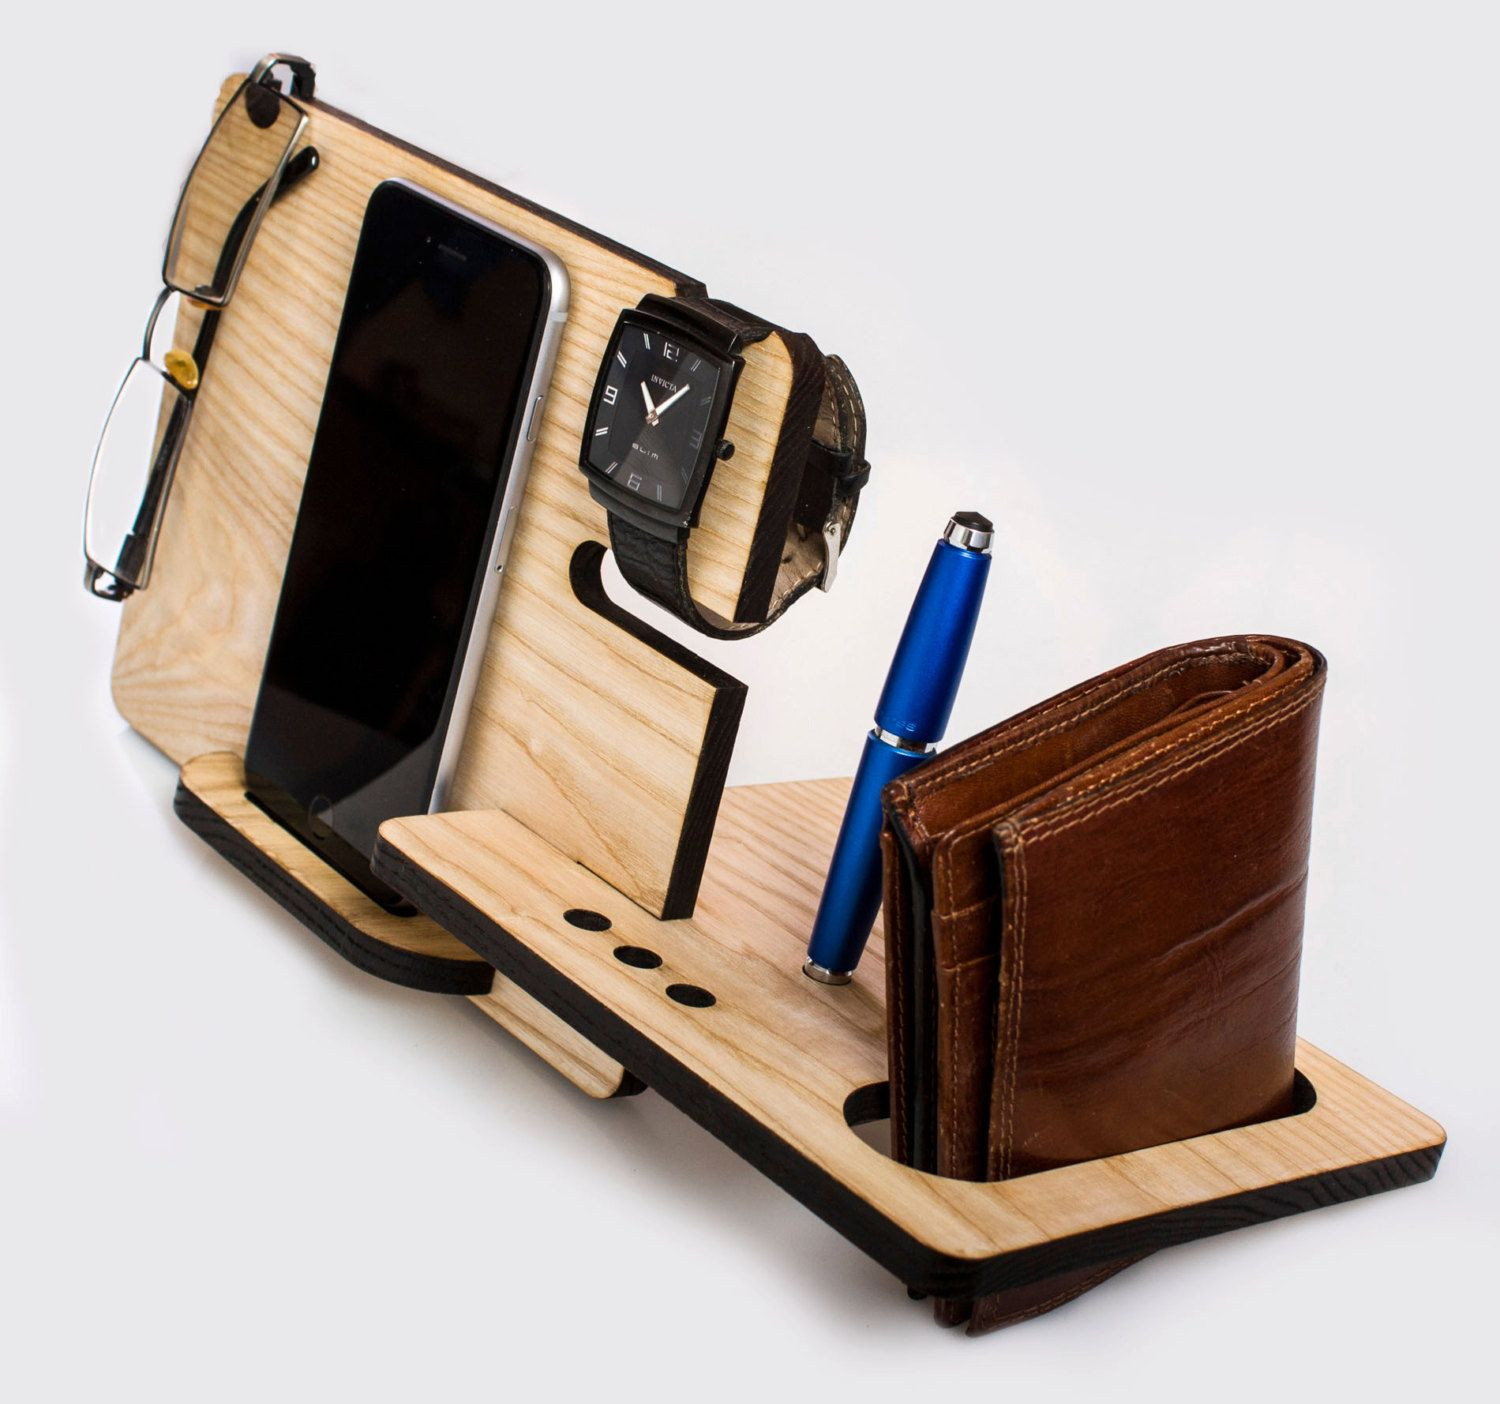 DIY Wooden Phone Dock
 iPhone or Samsung Galaxy wooden dock station christmas